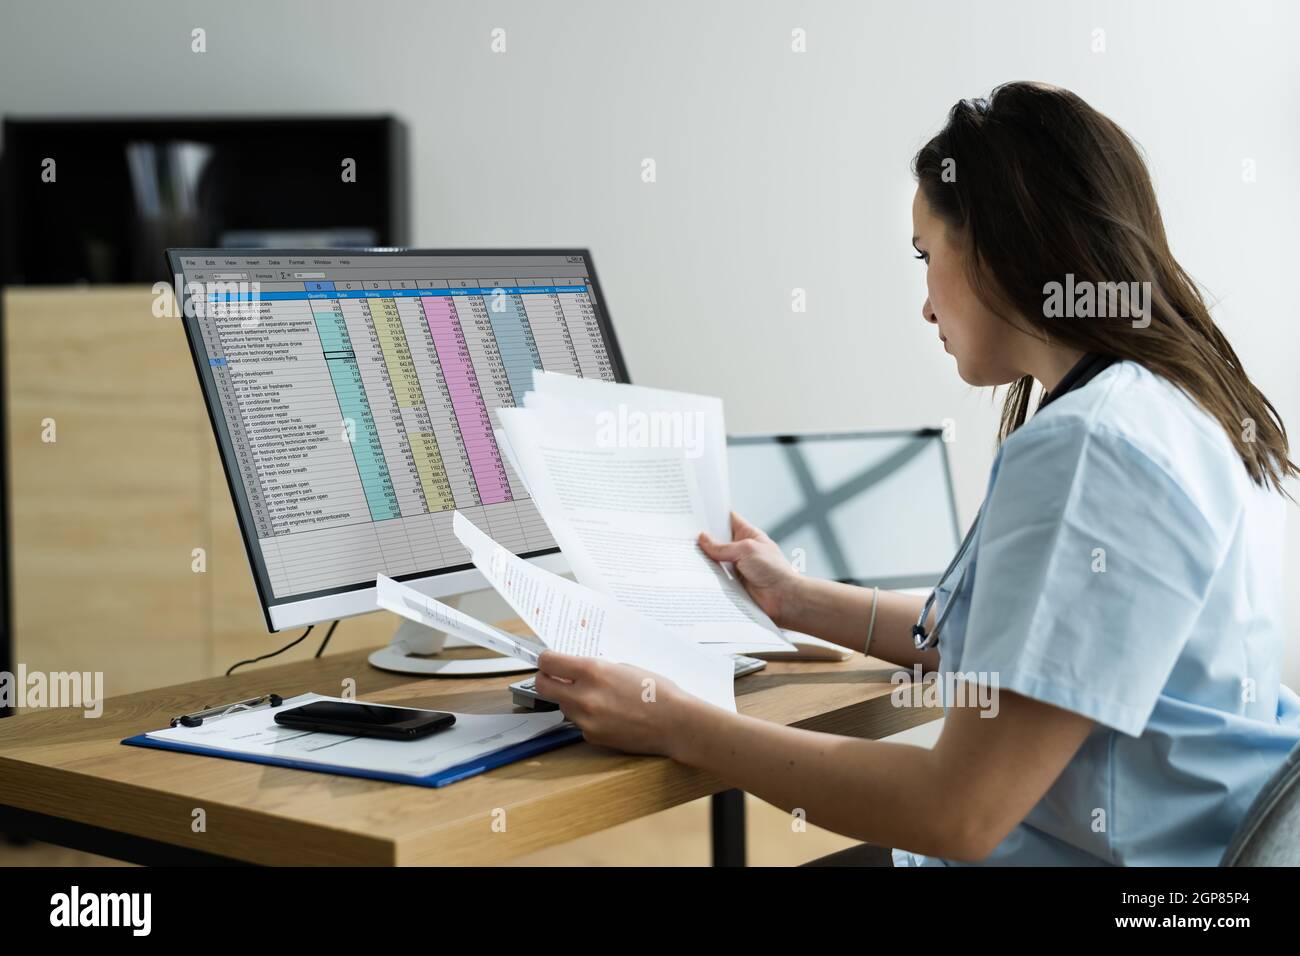 Medical Bill Codes And Spreadsheet Data. Business Analyst Woman Stock Photo